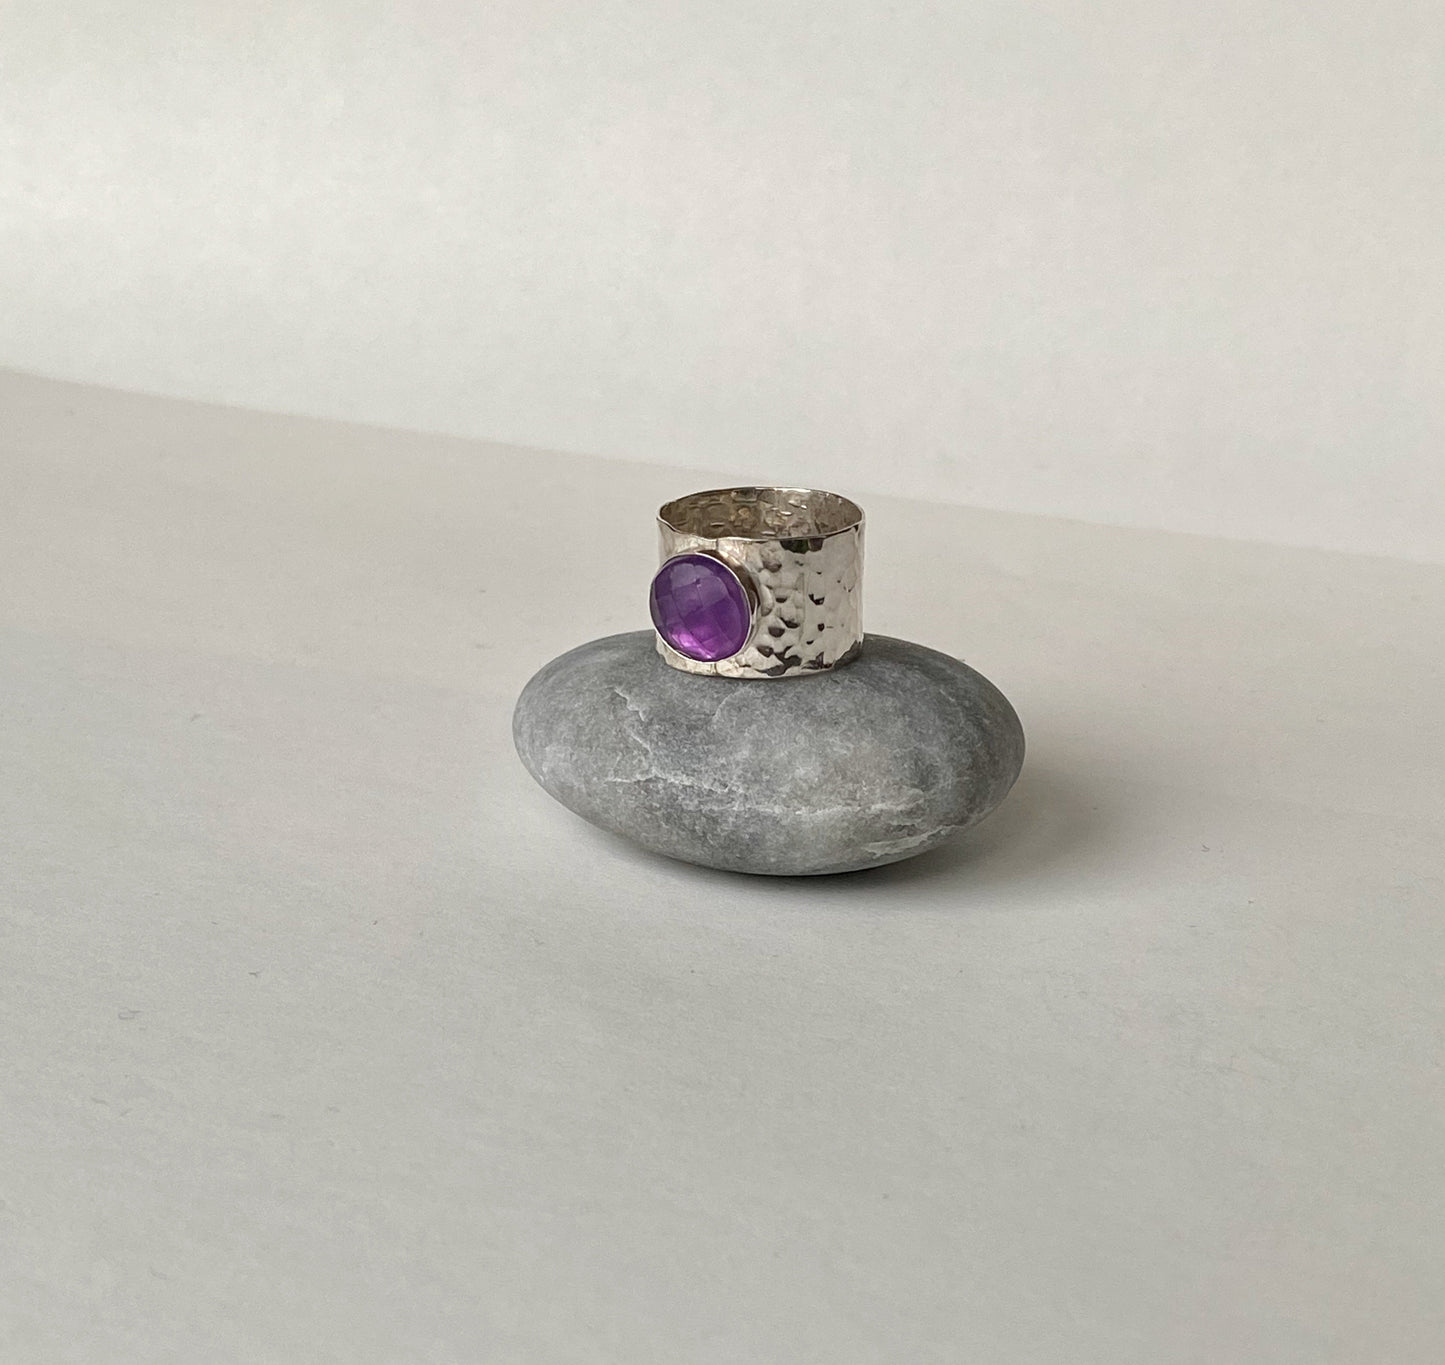 Striking size 6.5 handmade amethyst and sterling silver ring. Hammered band.